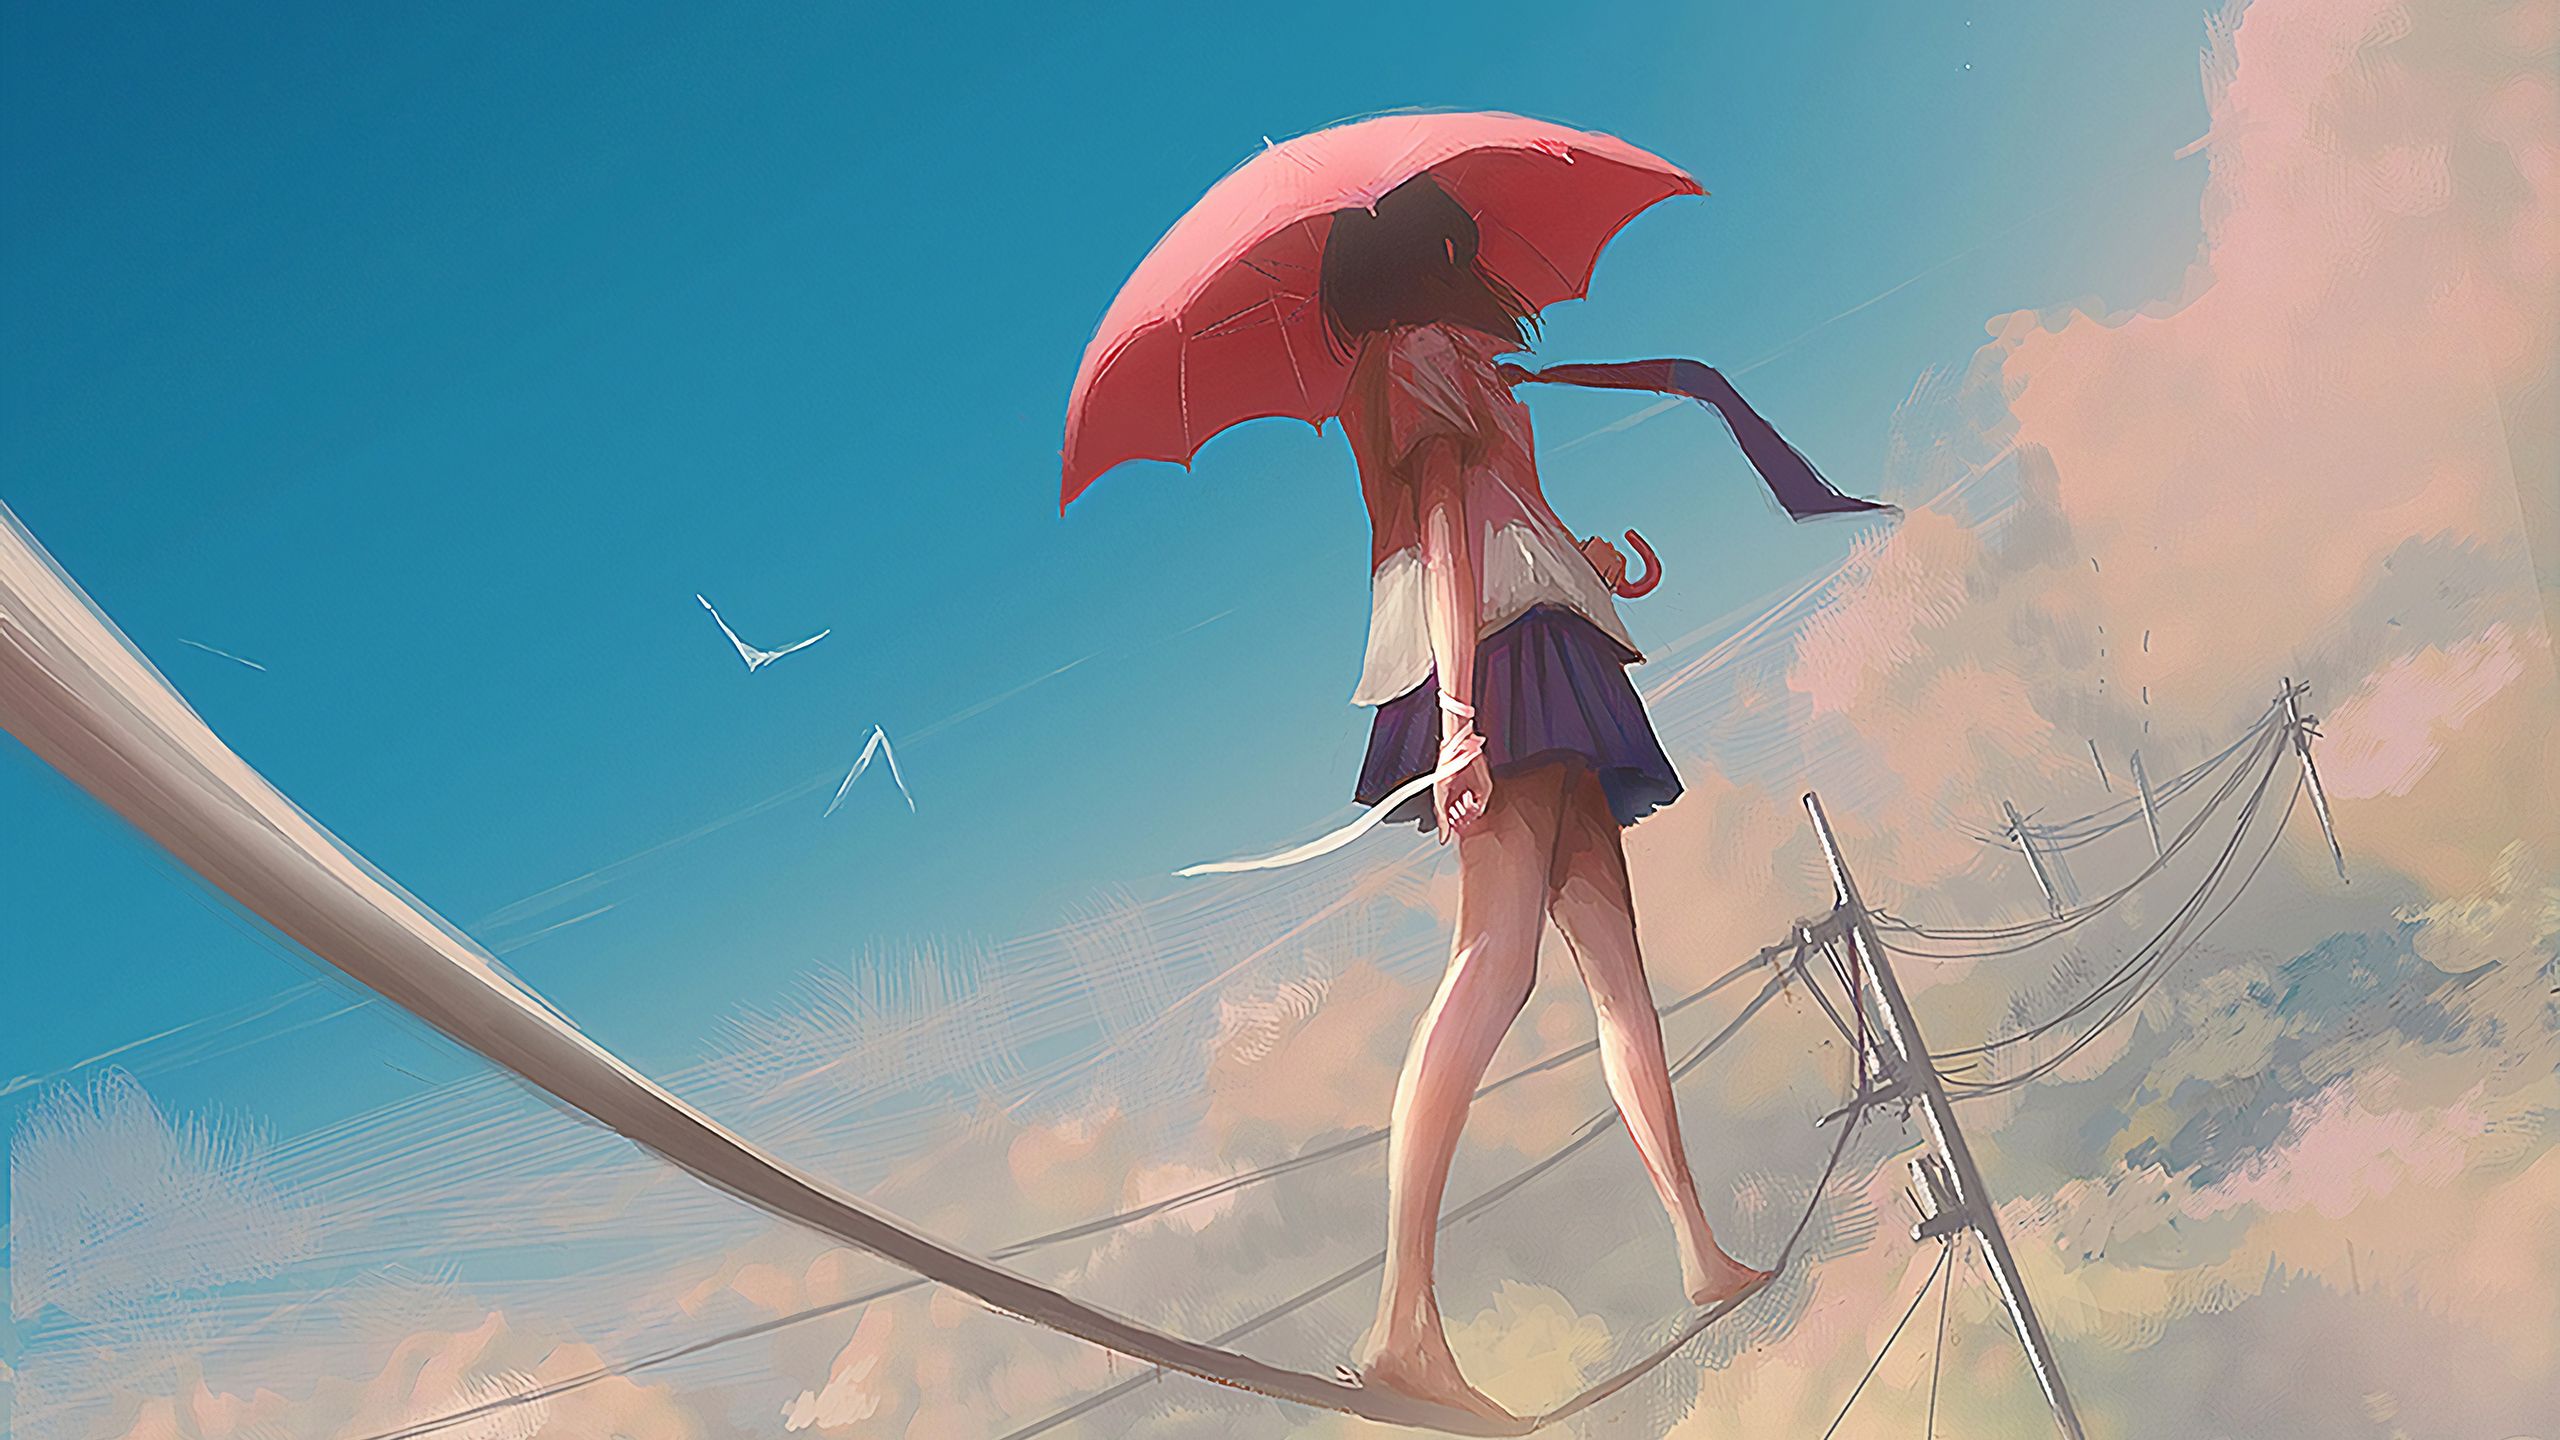 Anime Girl Walking On Power Line, HD Anime, 4k Wallpaper, Image, Background, Photo and Picture